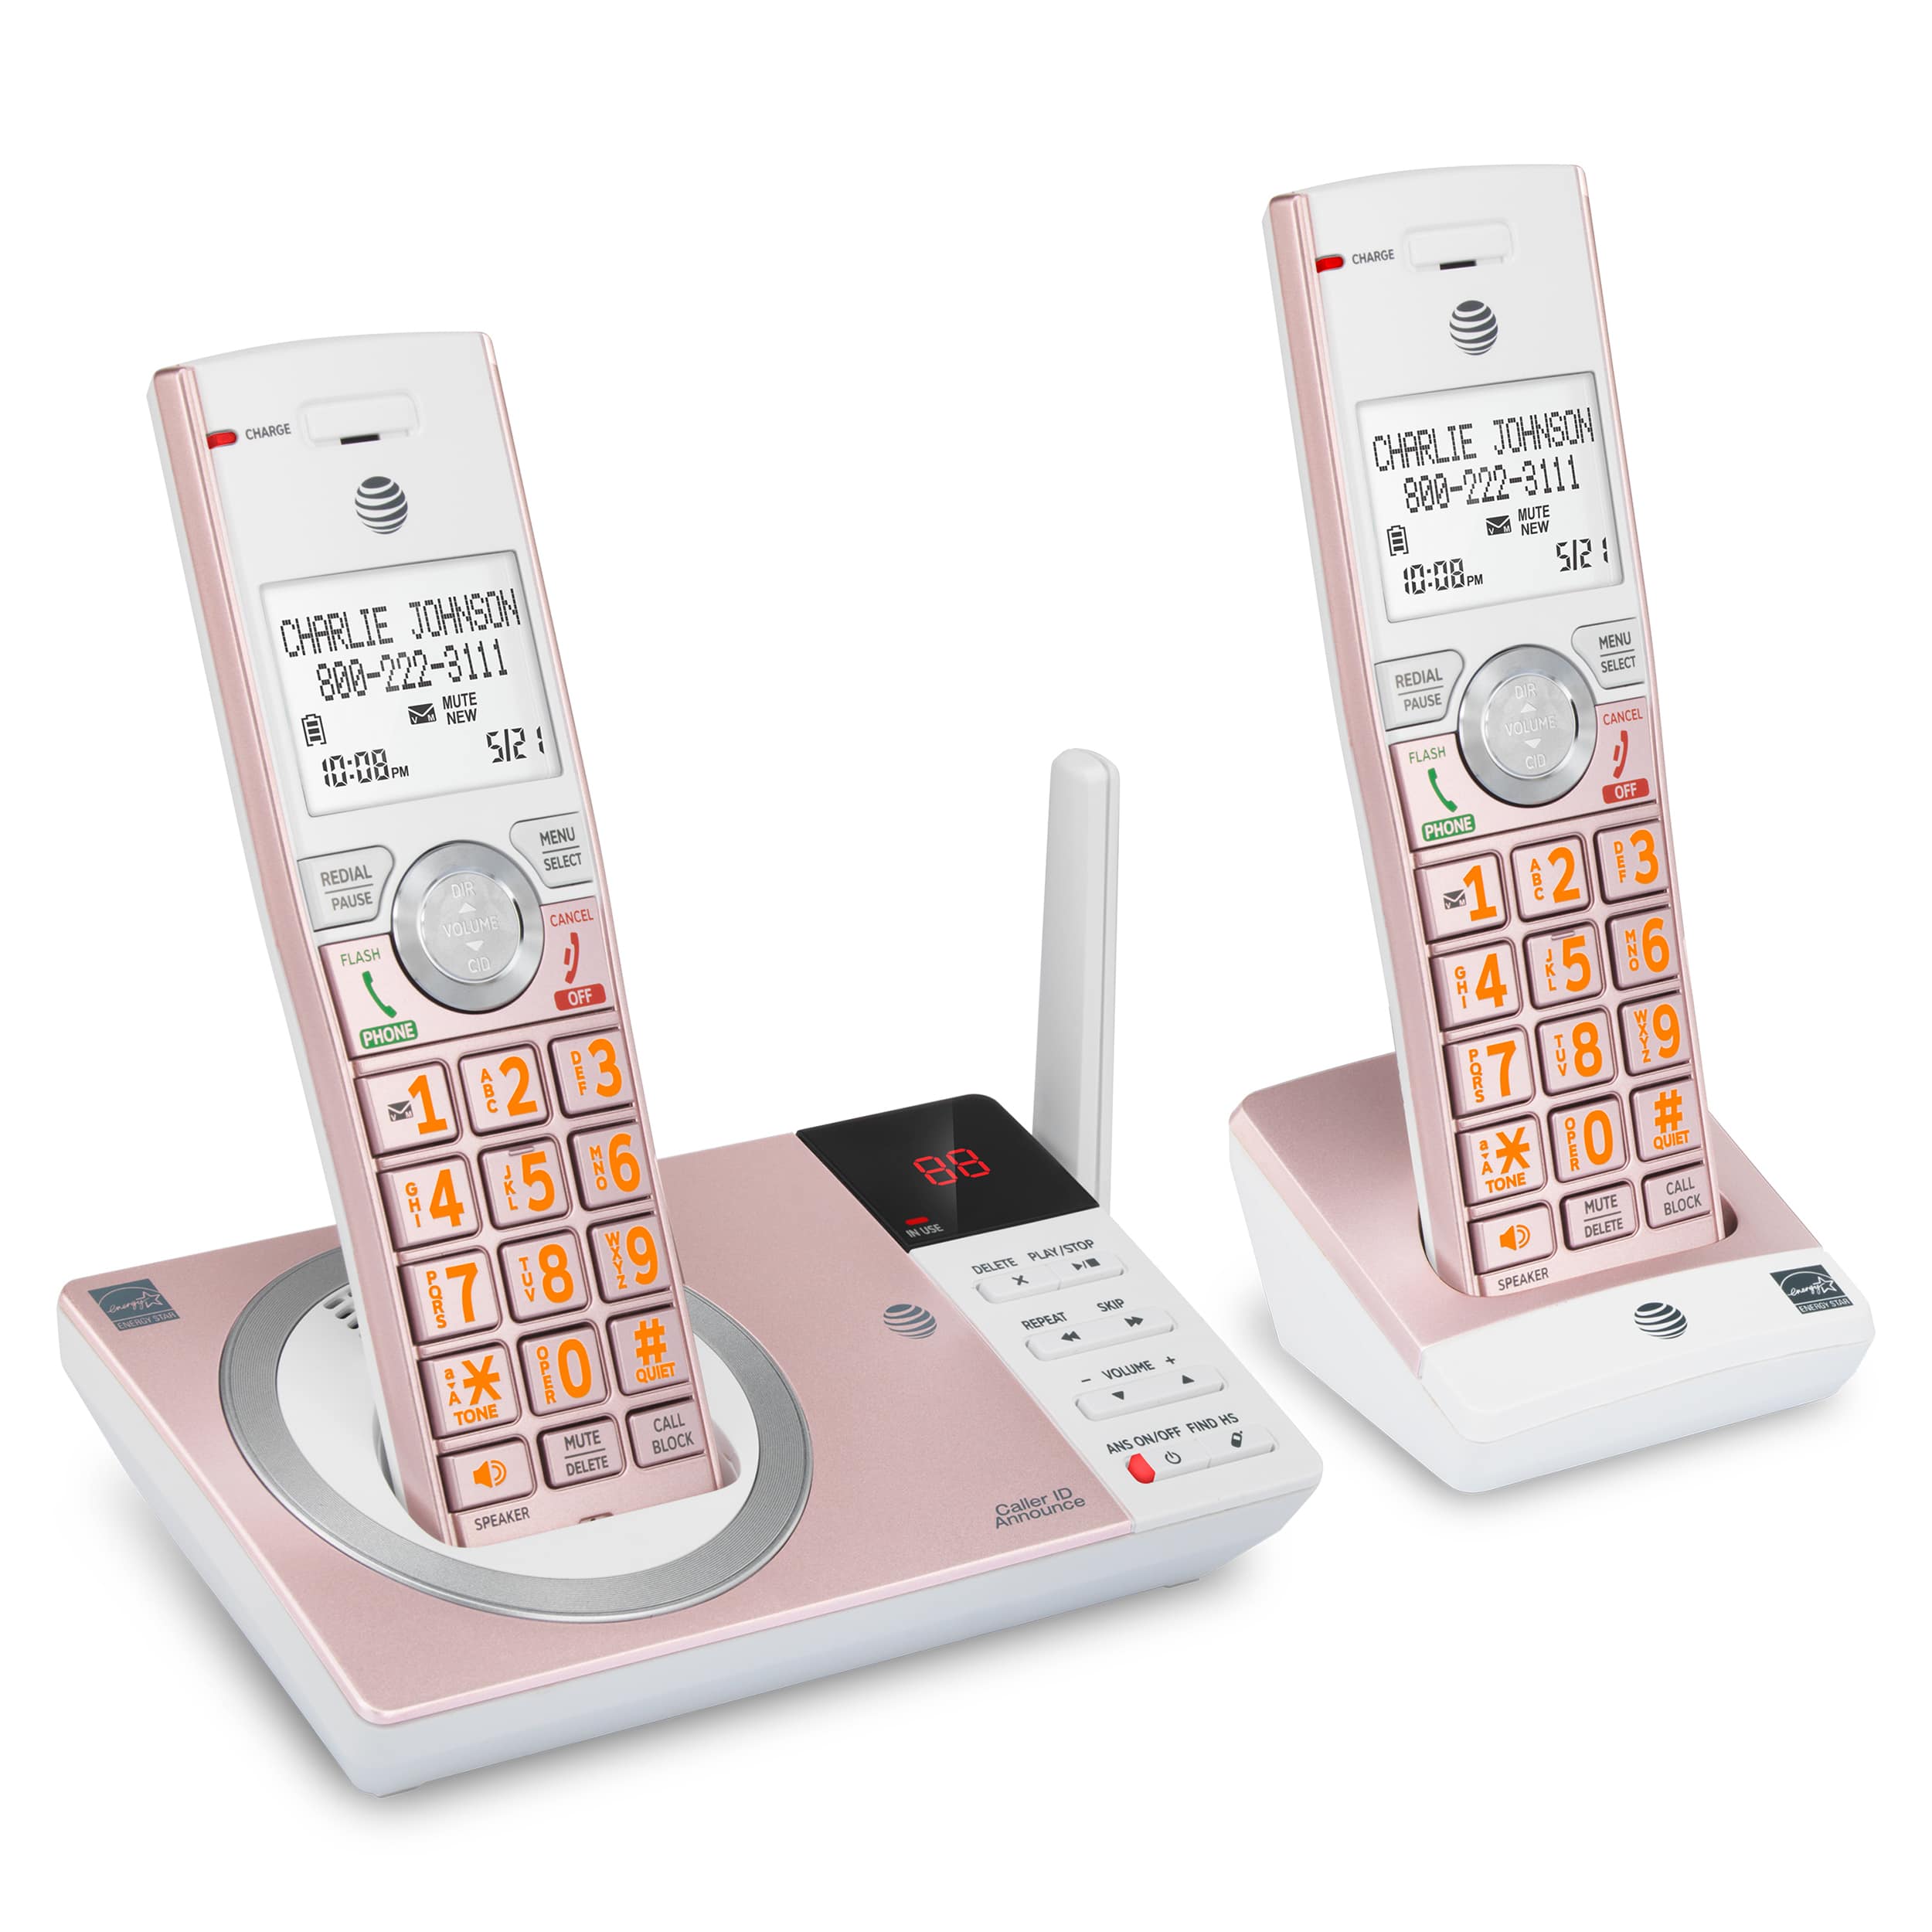 2 handset cordless answering system with smart call blocker - view 3